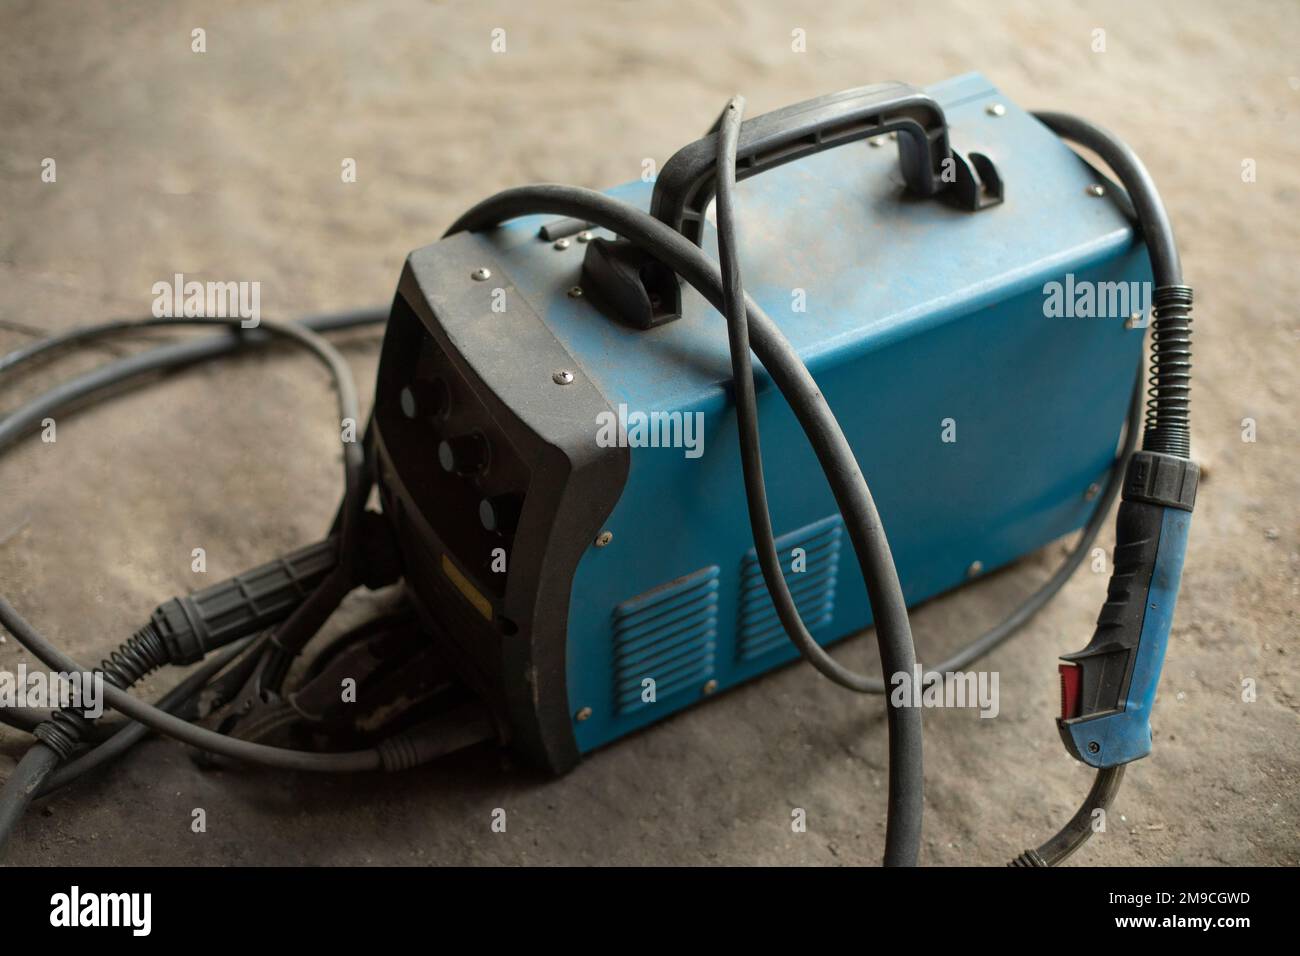 Electricity generator. Tools in garage. Battery storage. Stock Photo